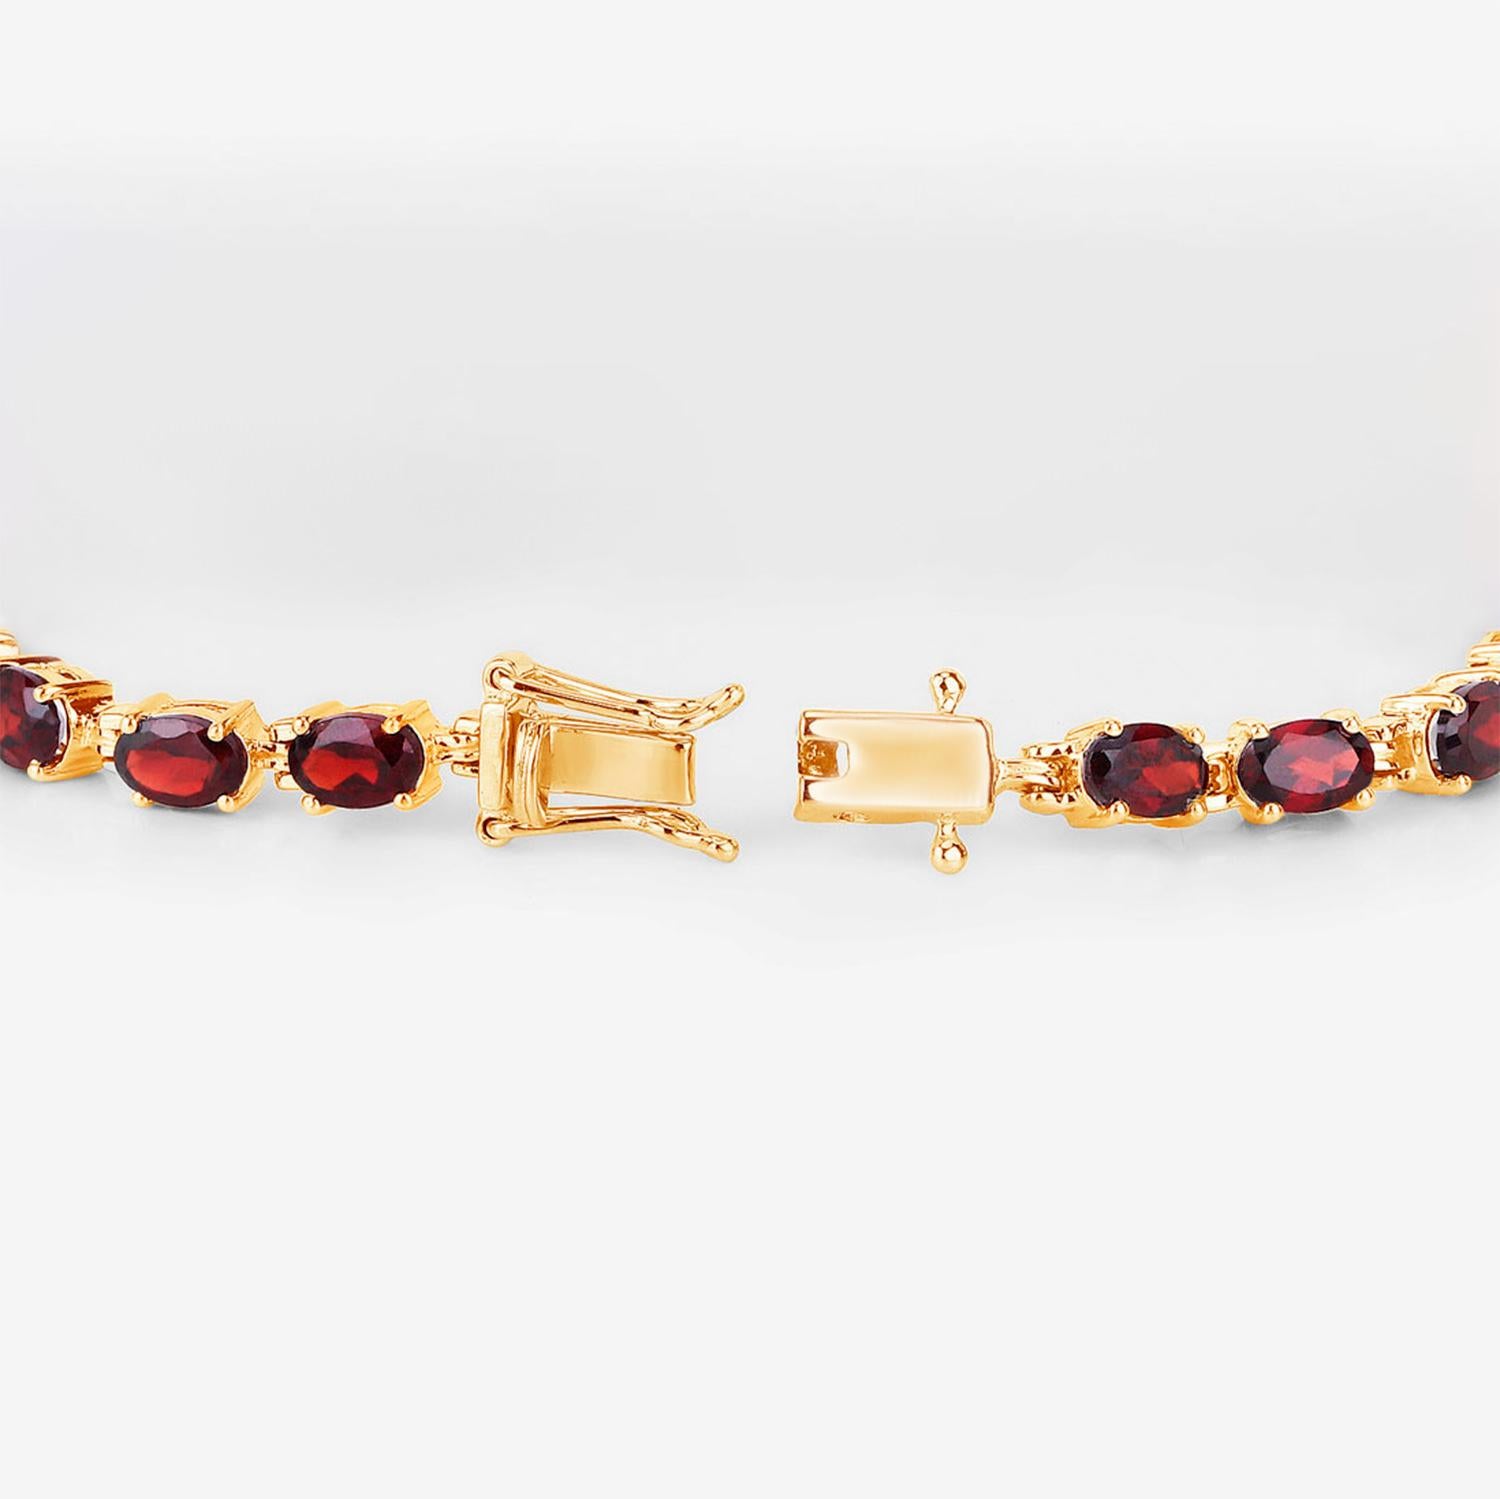 Oval Cut Natural Red Garnet Tennis Bracelet 11 Carats 14K Yellow Gold Plated Silver For Sale